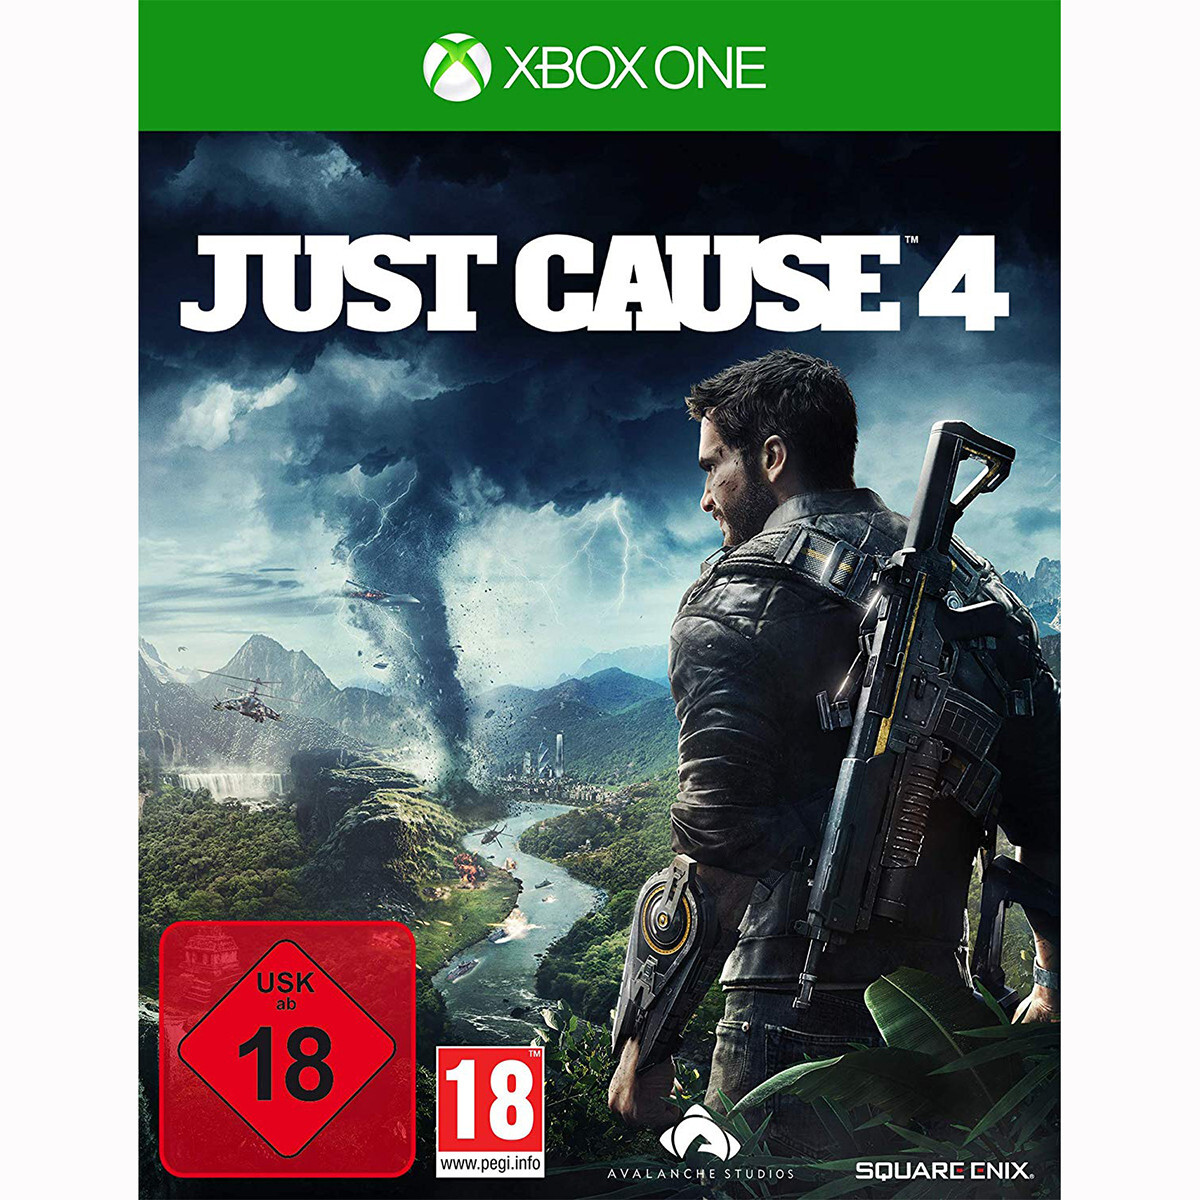 Игра just one. Just cause 4 [Xbox one]. Just cause 4 Xbox 360. Just cause 4: новая обойма. Just cause 4 Xbox Series.